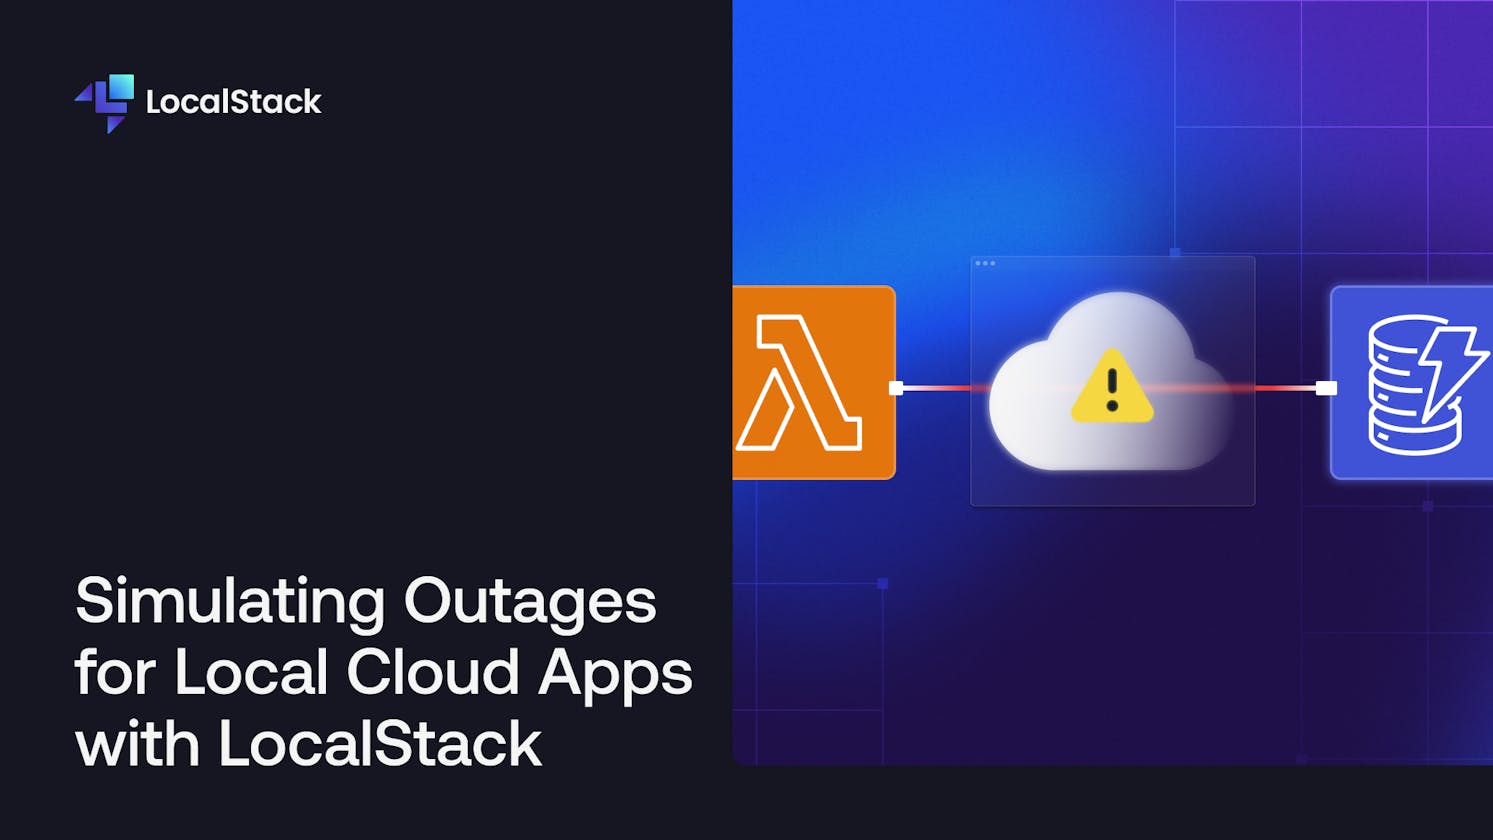 Simulating outages for local cloud apps with LocalStack